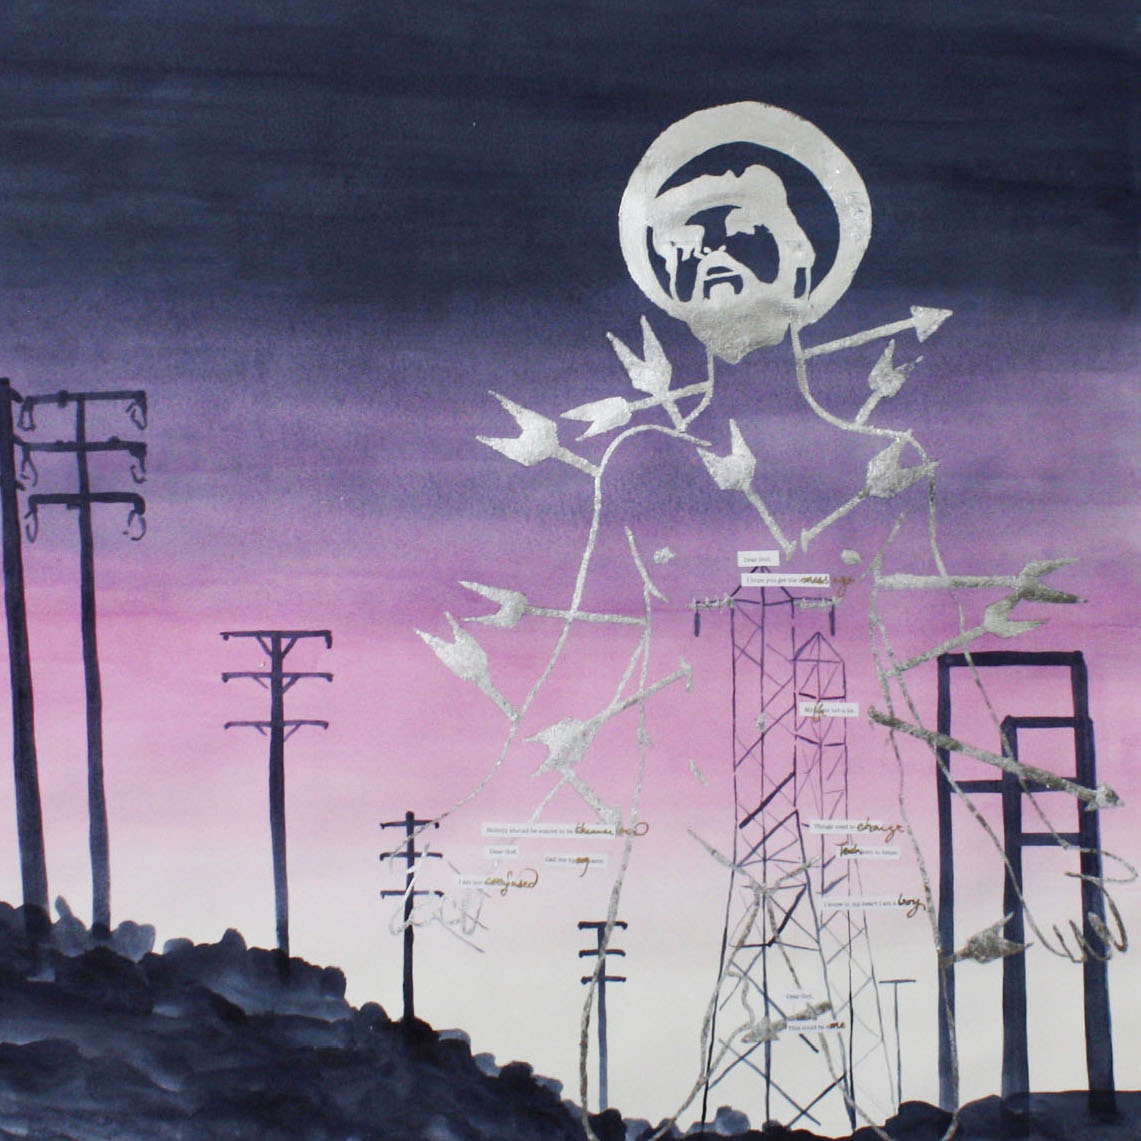 K. Ryan Henisey, Trans Sebastian, 2018. Watercolor, ink, marker, and metal foil. 40.5 x 35” Courtesy of the artist. A watercolor painting of a landscape with electrical towers and the outline of a figure hit with arrows in silver